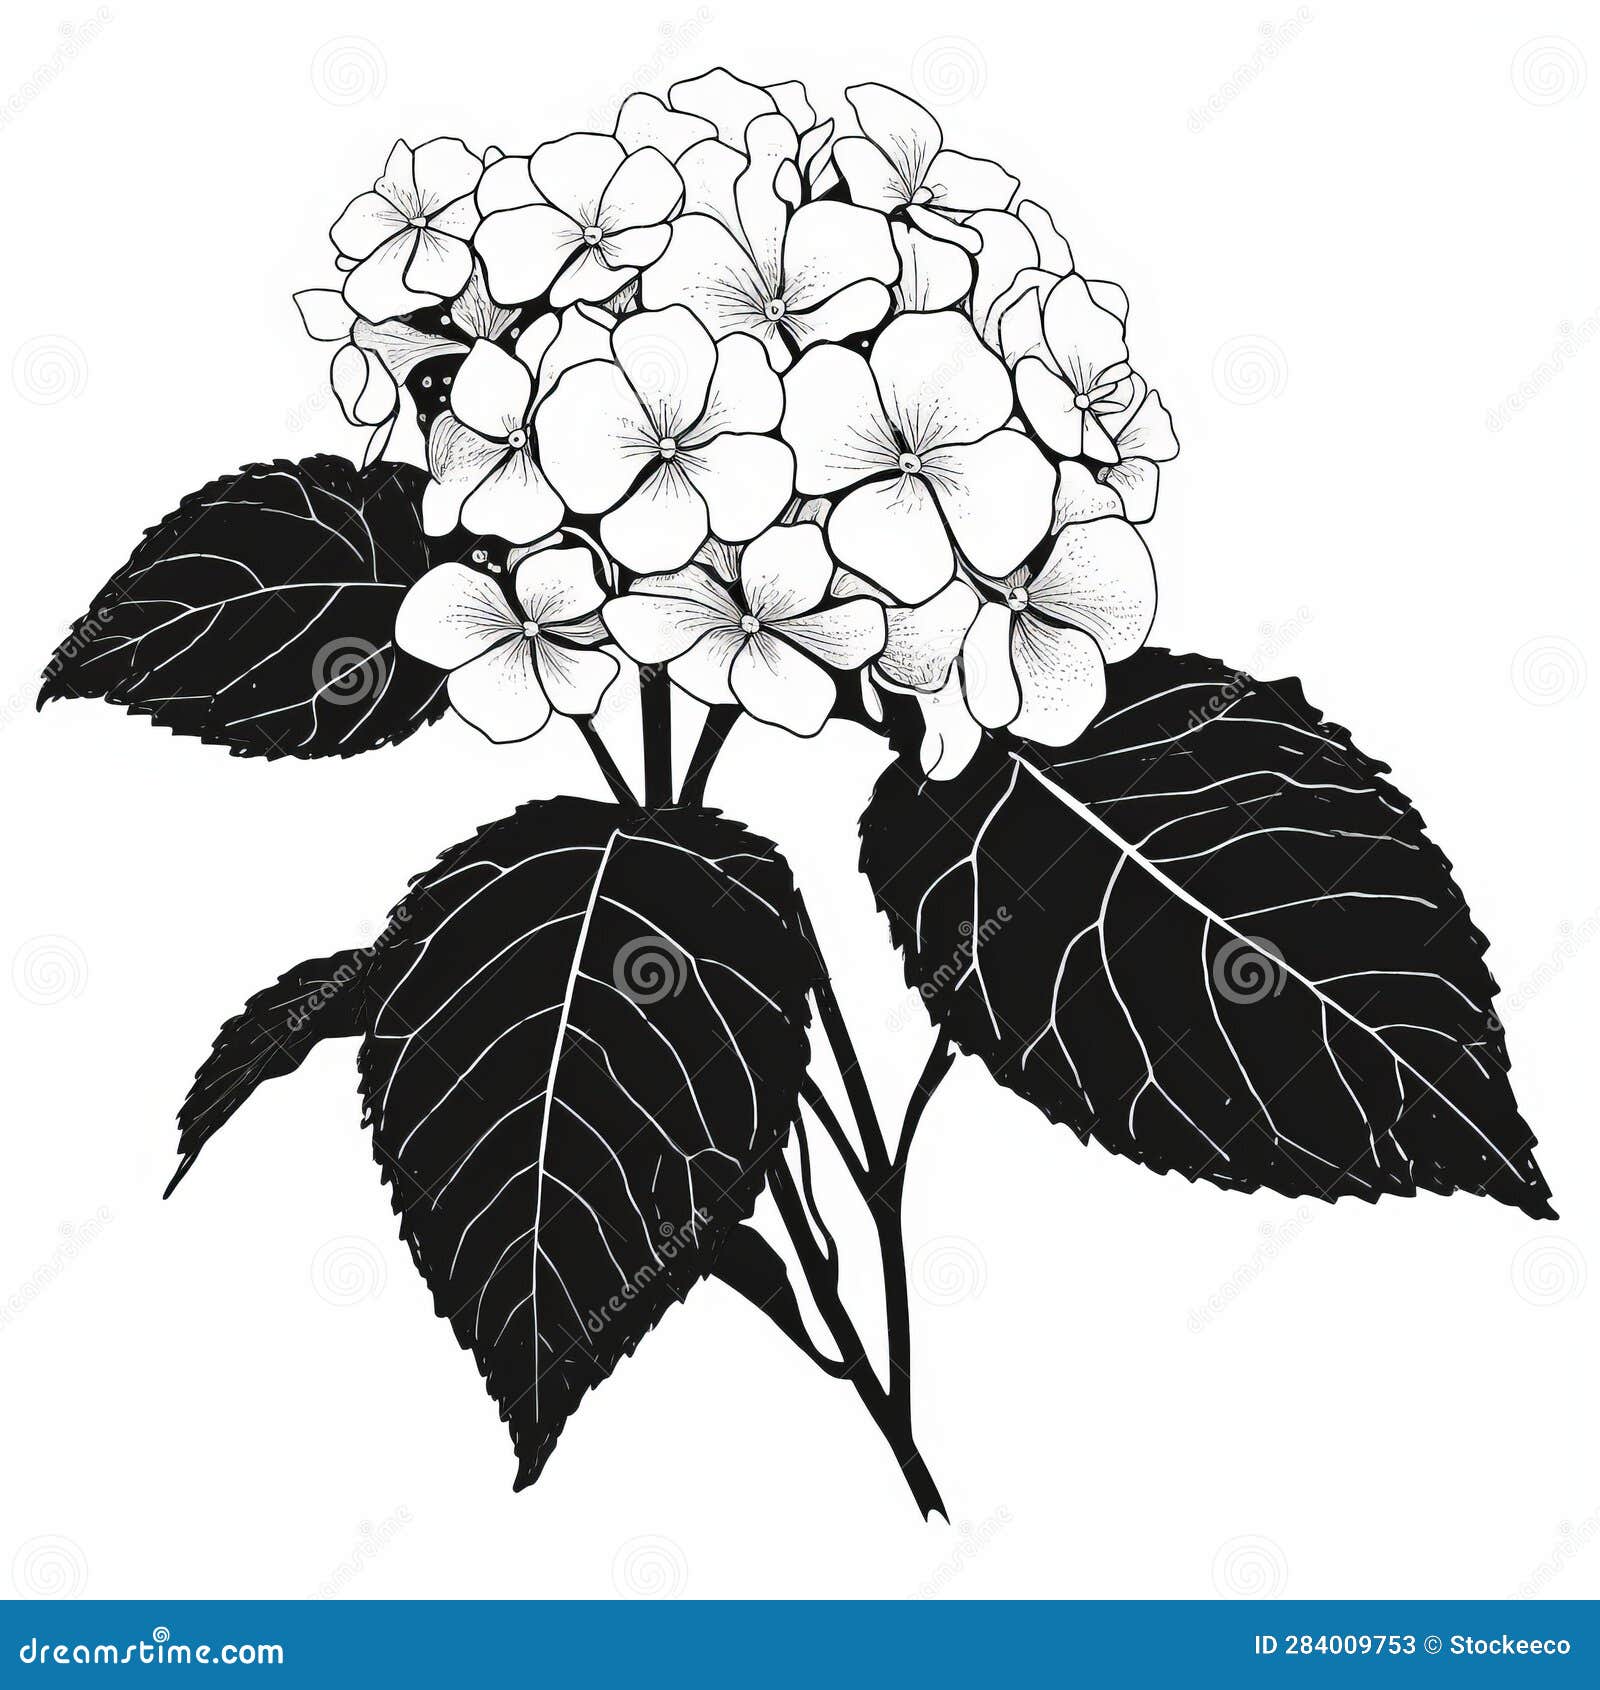 hydrangea silhouette : black and white botanical drawing